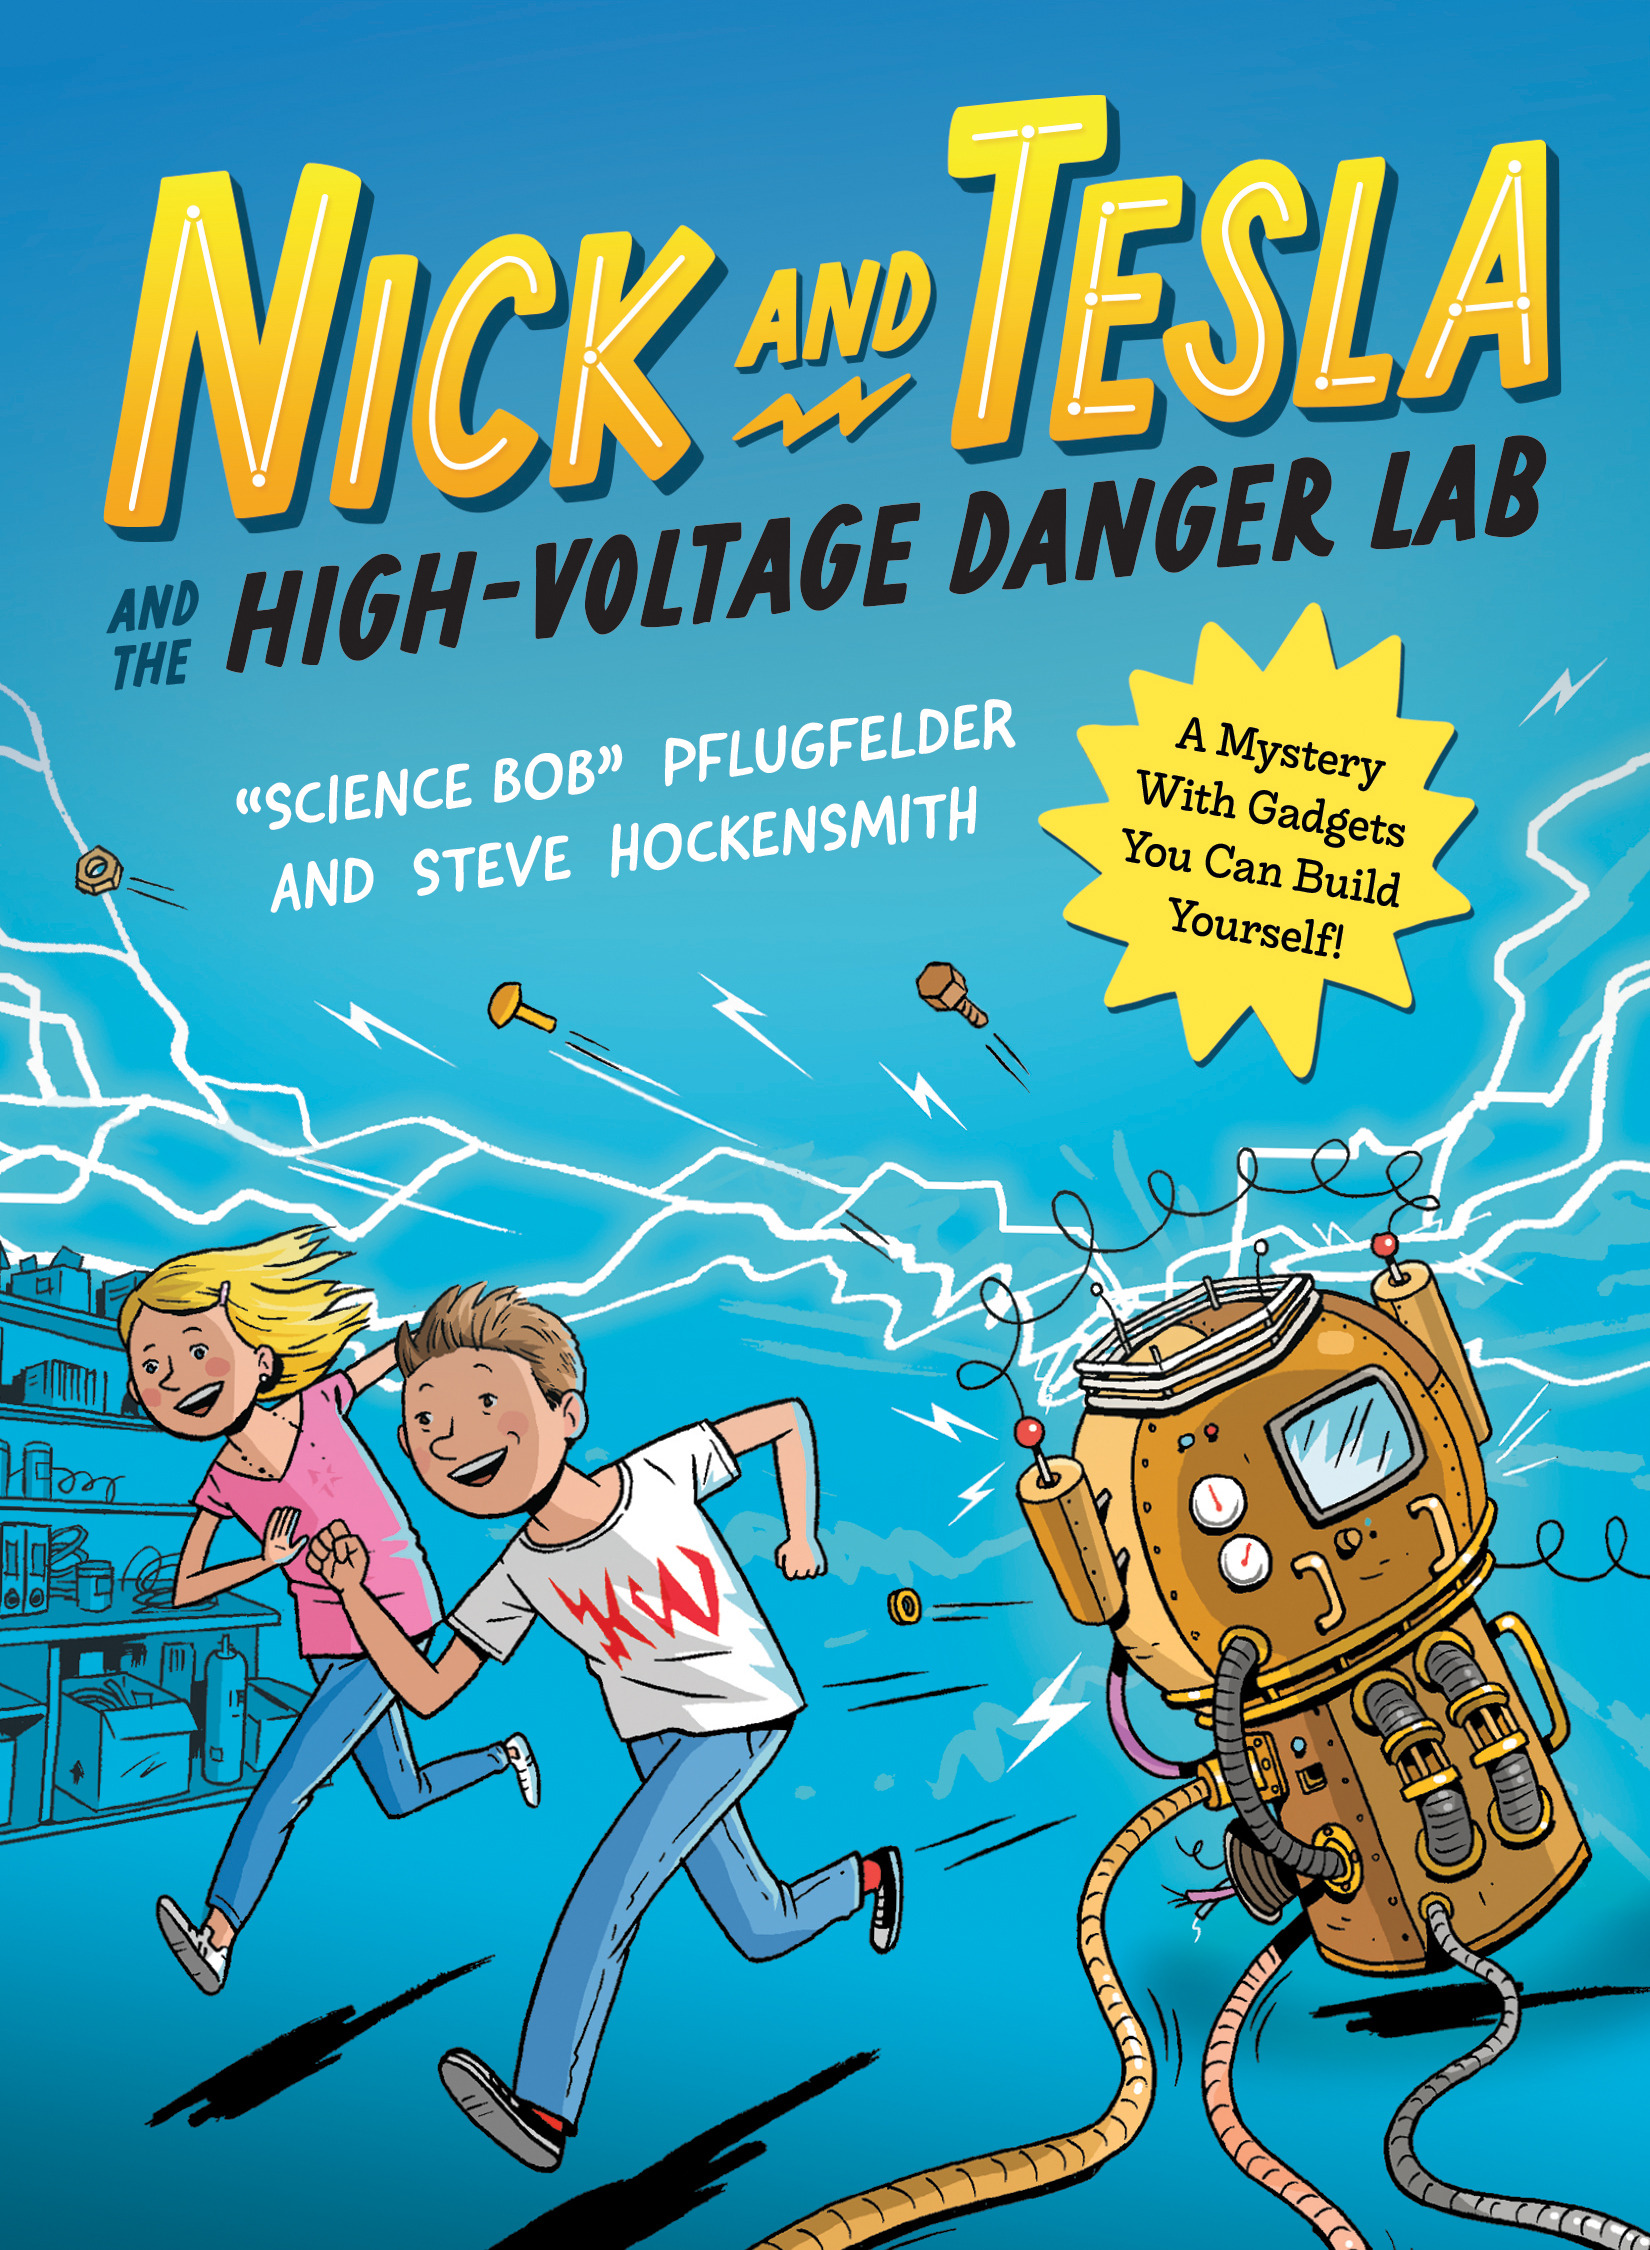 Nick and Tesla and the High-Voltage Danger Lab : A Mystery with Gadgets You Can Build Yourself | Pflugfelder, Bob (Auteur) | Hockensmith, Steve (Auteur)